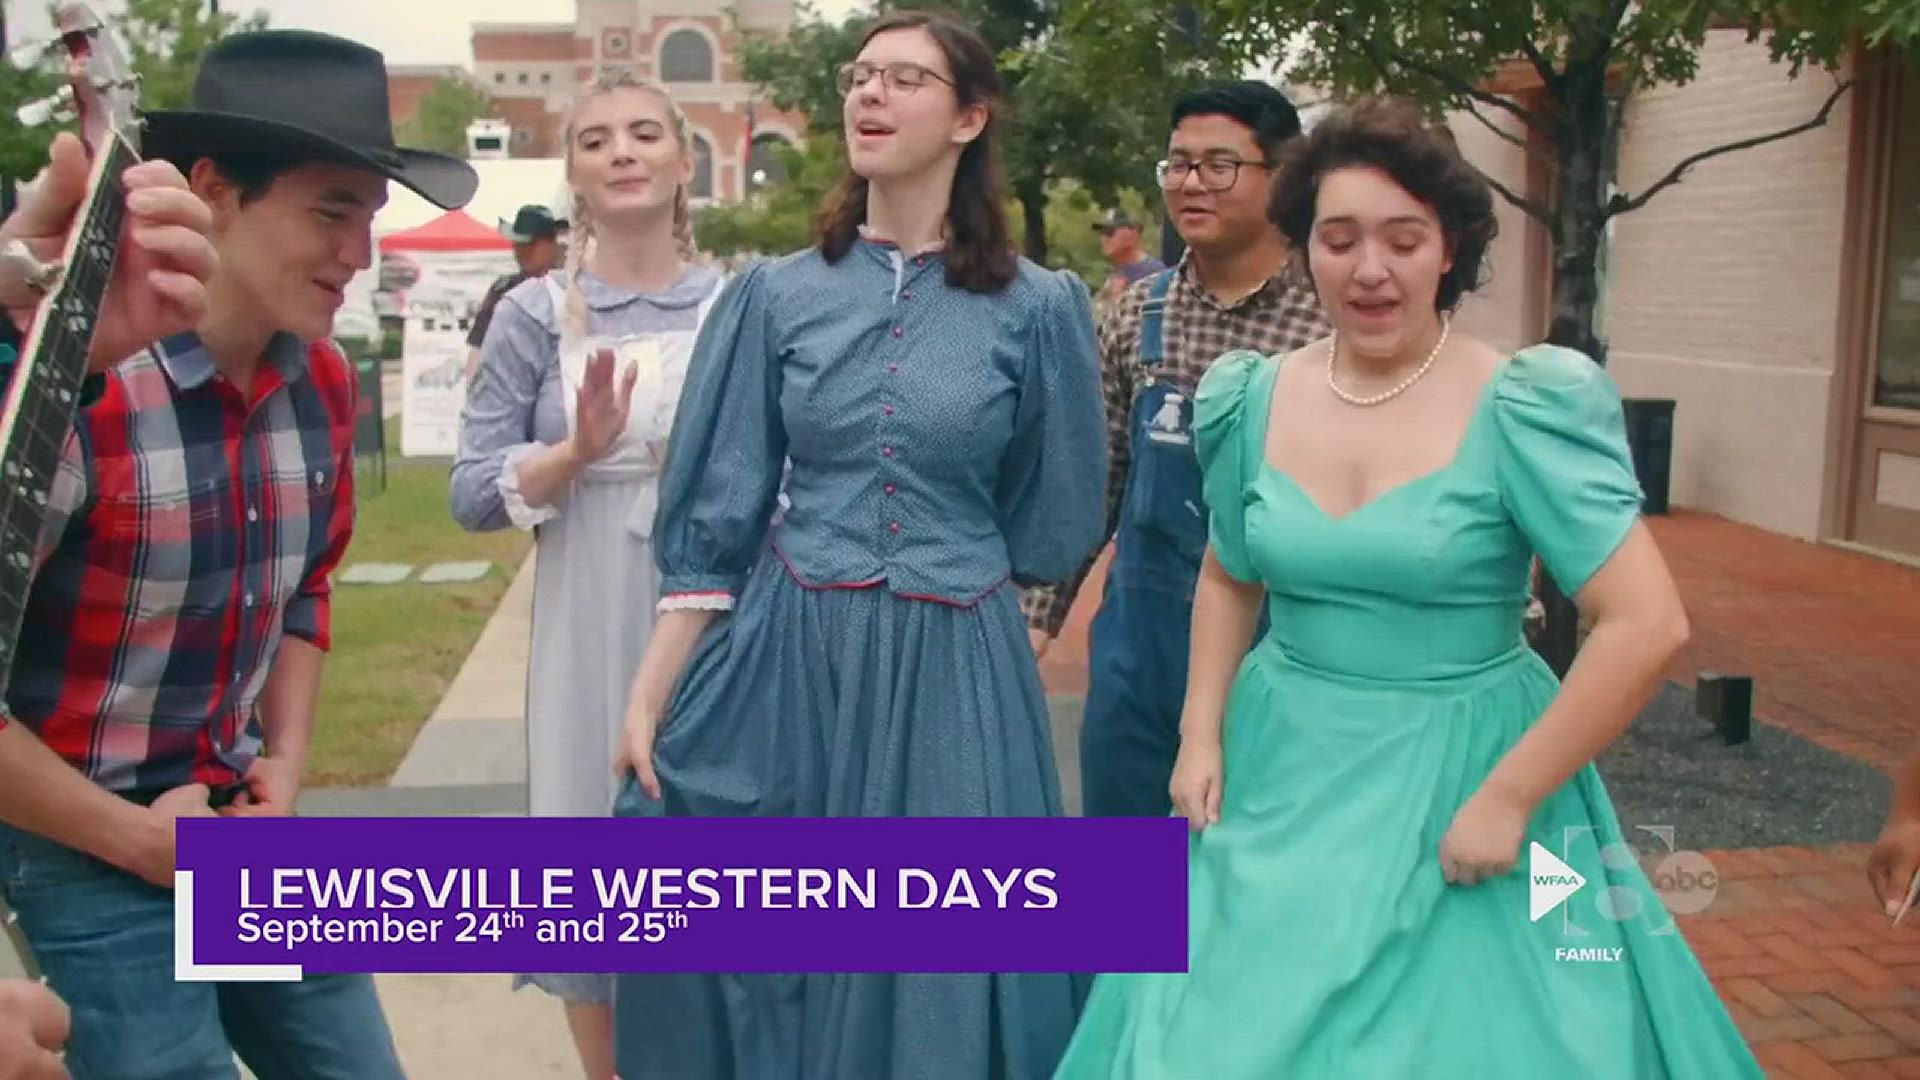 'The West’ comes alive for amazing two days in Lewisville with live entertainment, kid’s activities, stage performances, fun foods and market shopping.